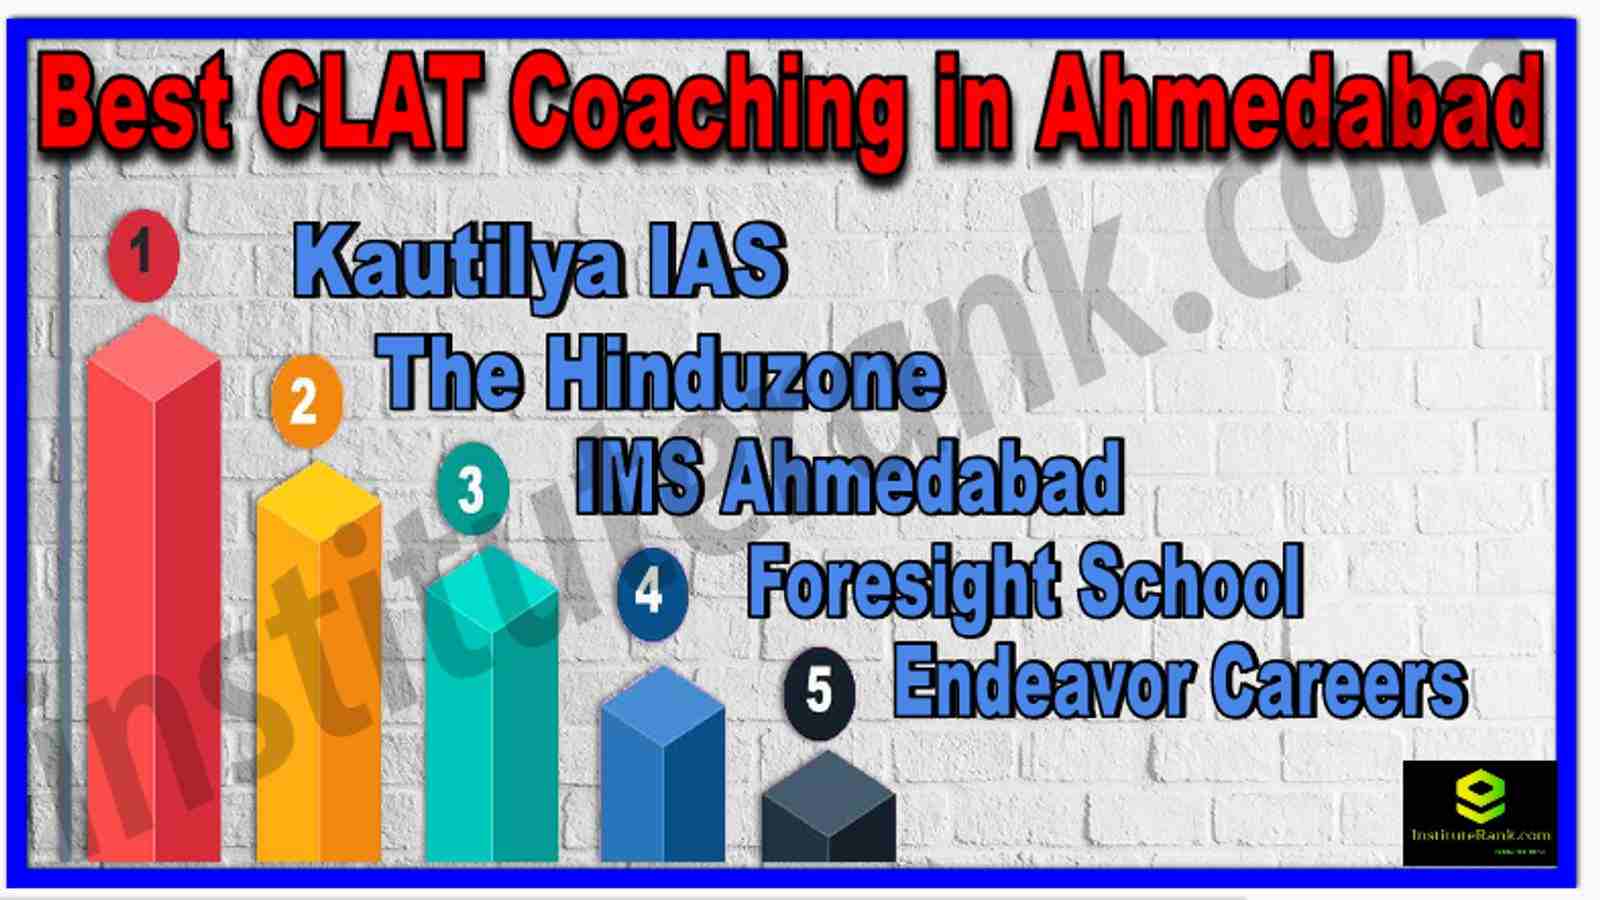 Best CLAT Coaching in Ahmedabad